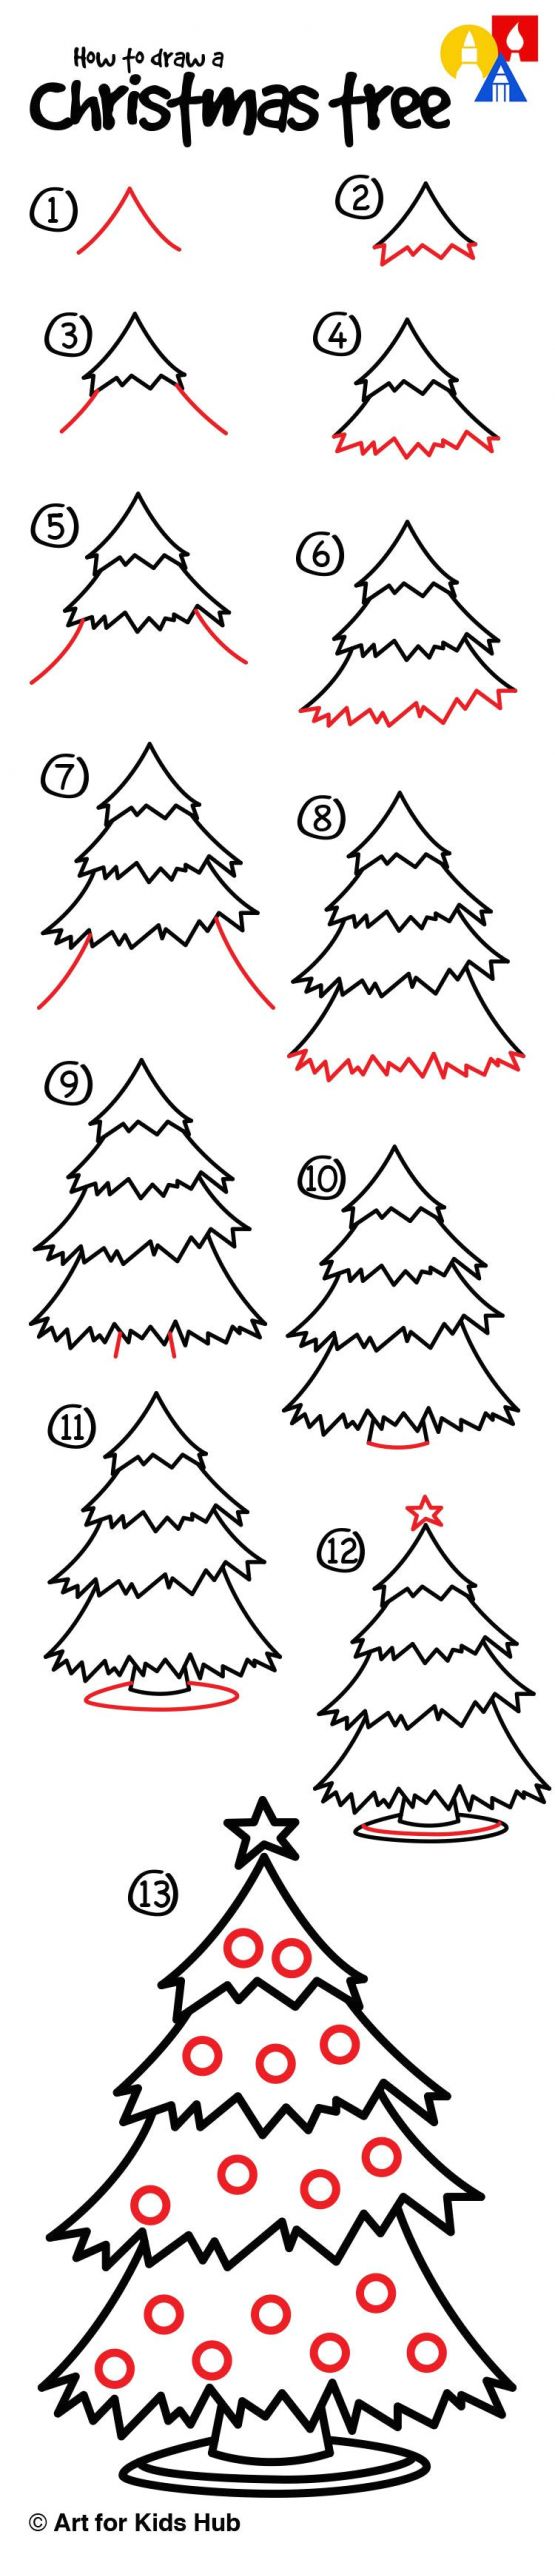 Draw A Tree Easy How to Draw A Christmas Tree Art for Kids Hub Zeichnen